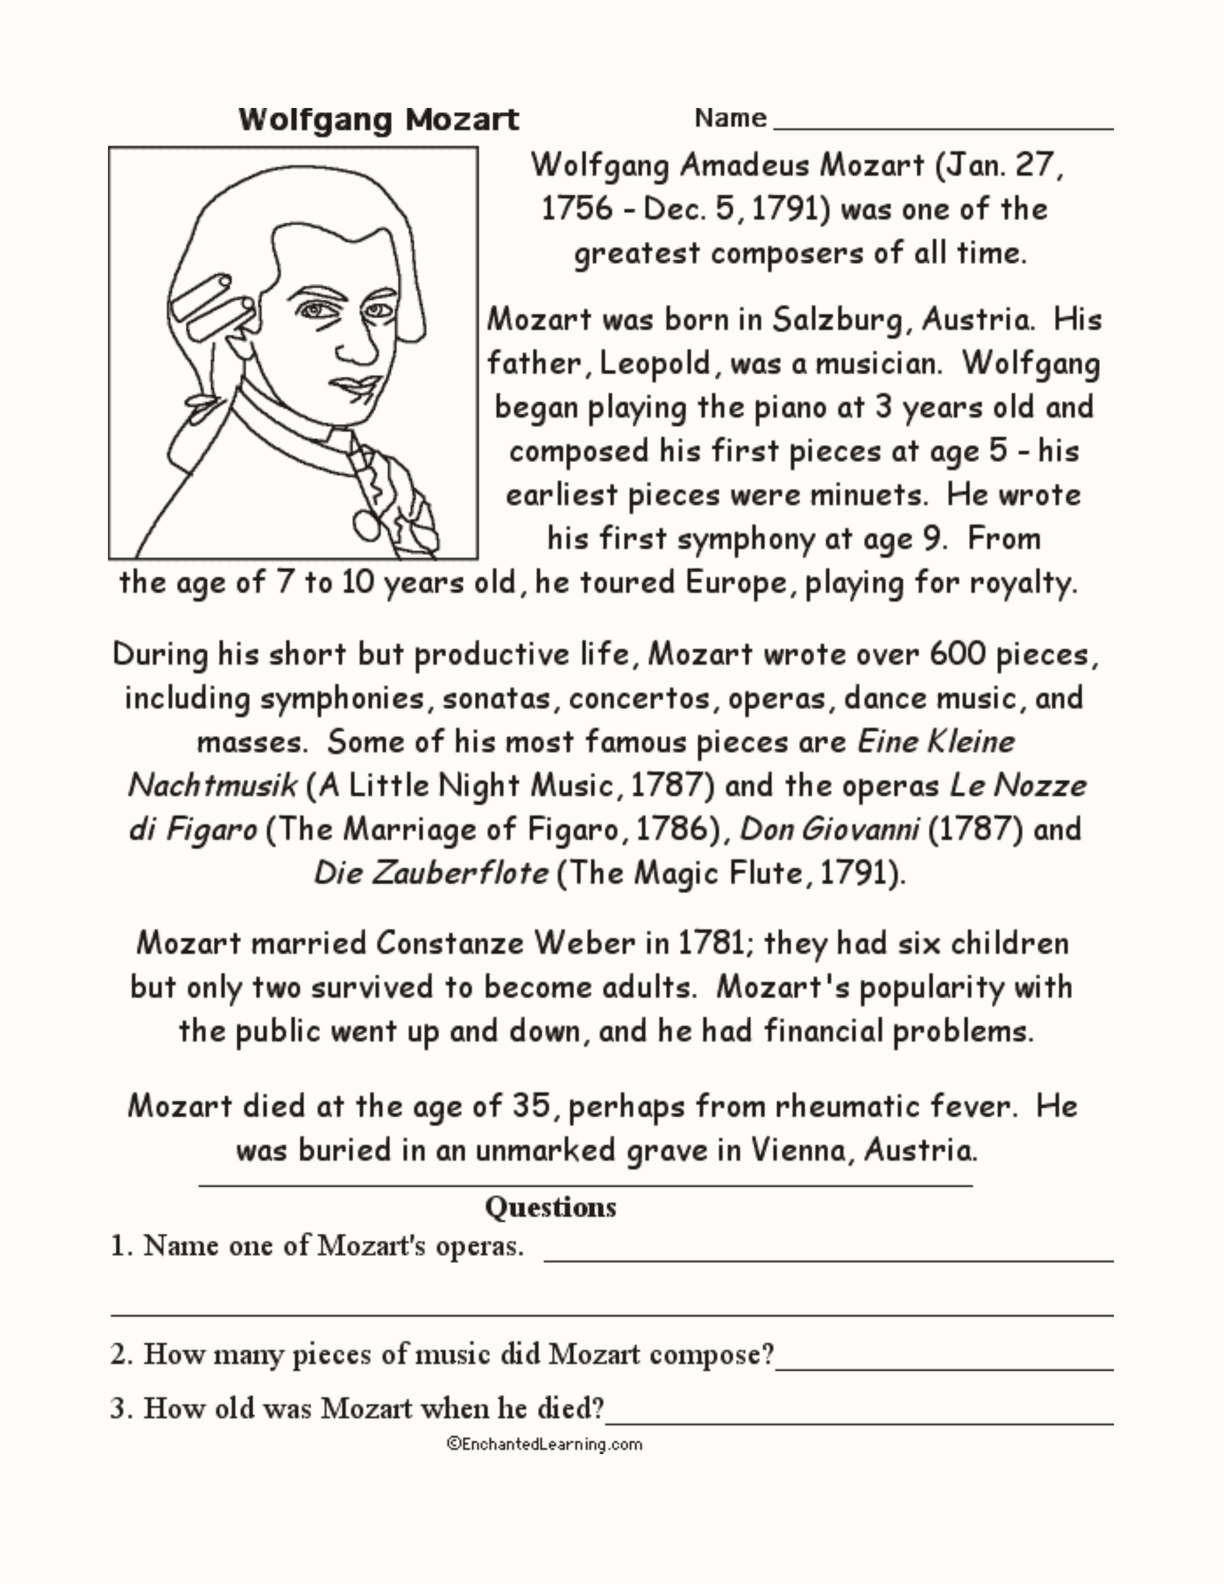 Wolfgang Mozart Question and Answer interactive worksheet page 1